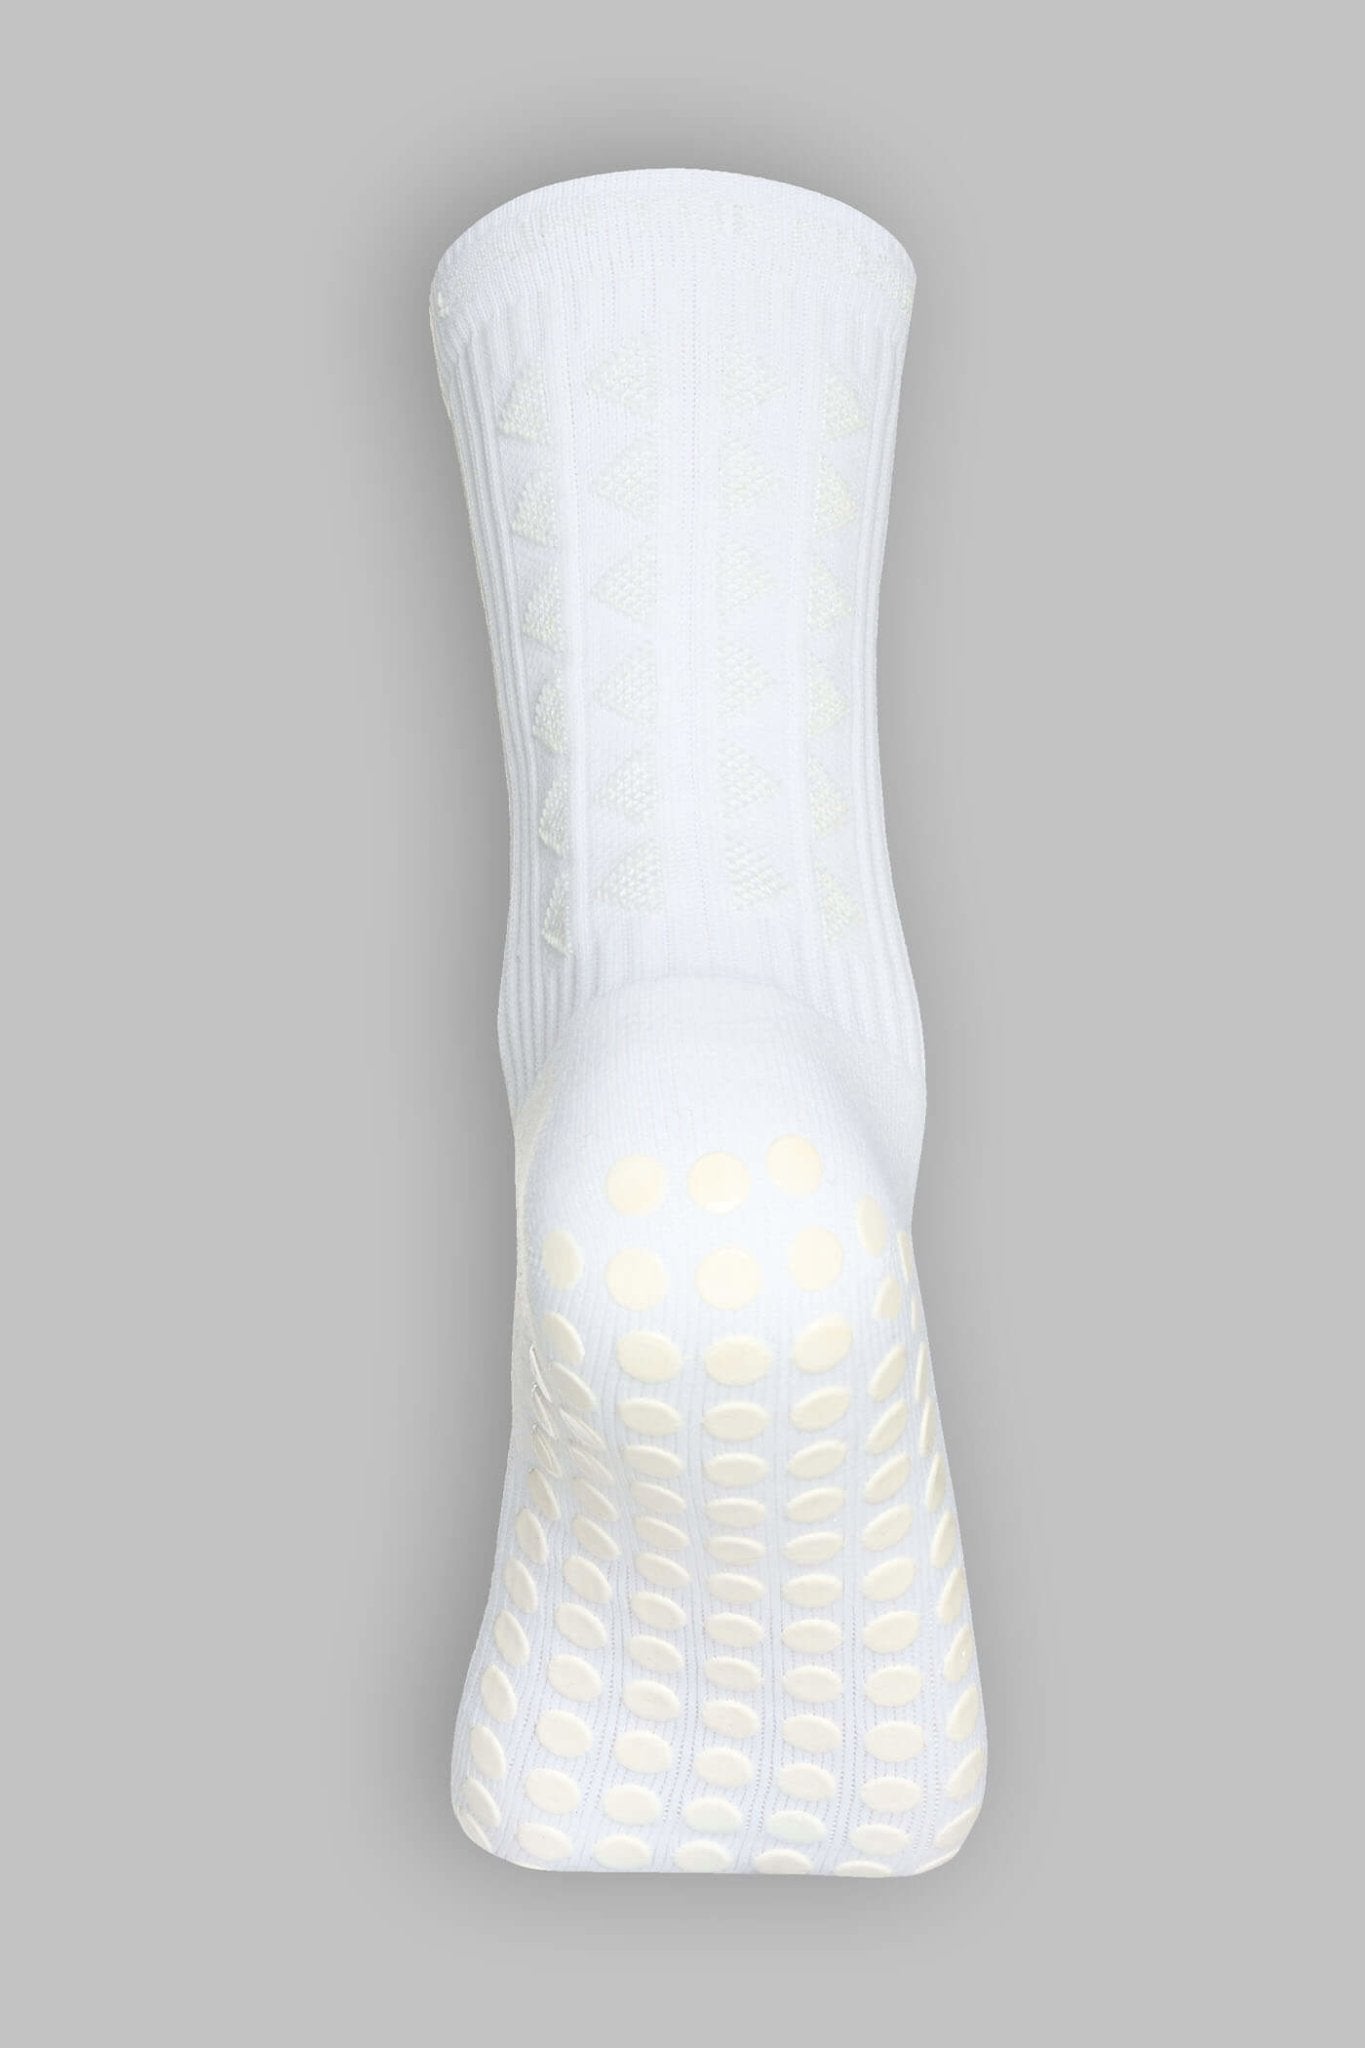 WHITEOUT LIMITED EDITION GRIP SOCKS 2.0 - Gain The Edge US